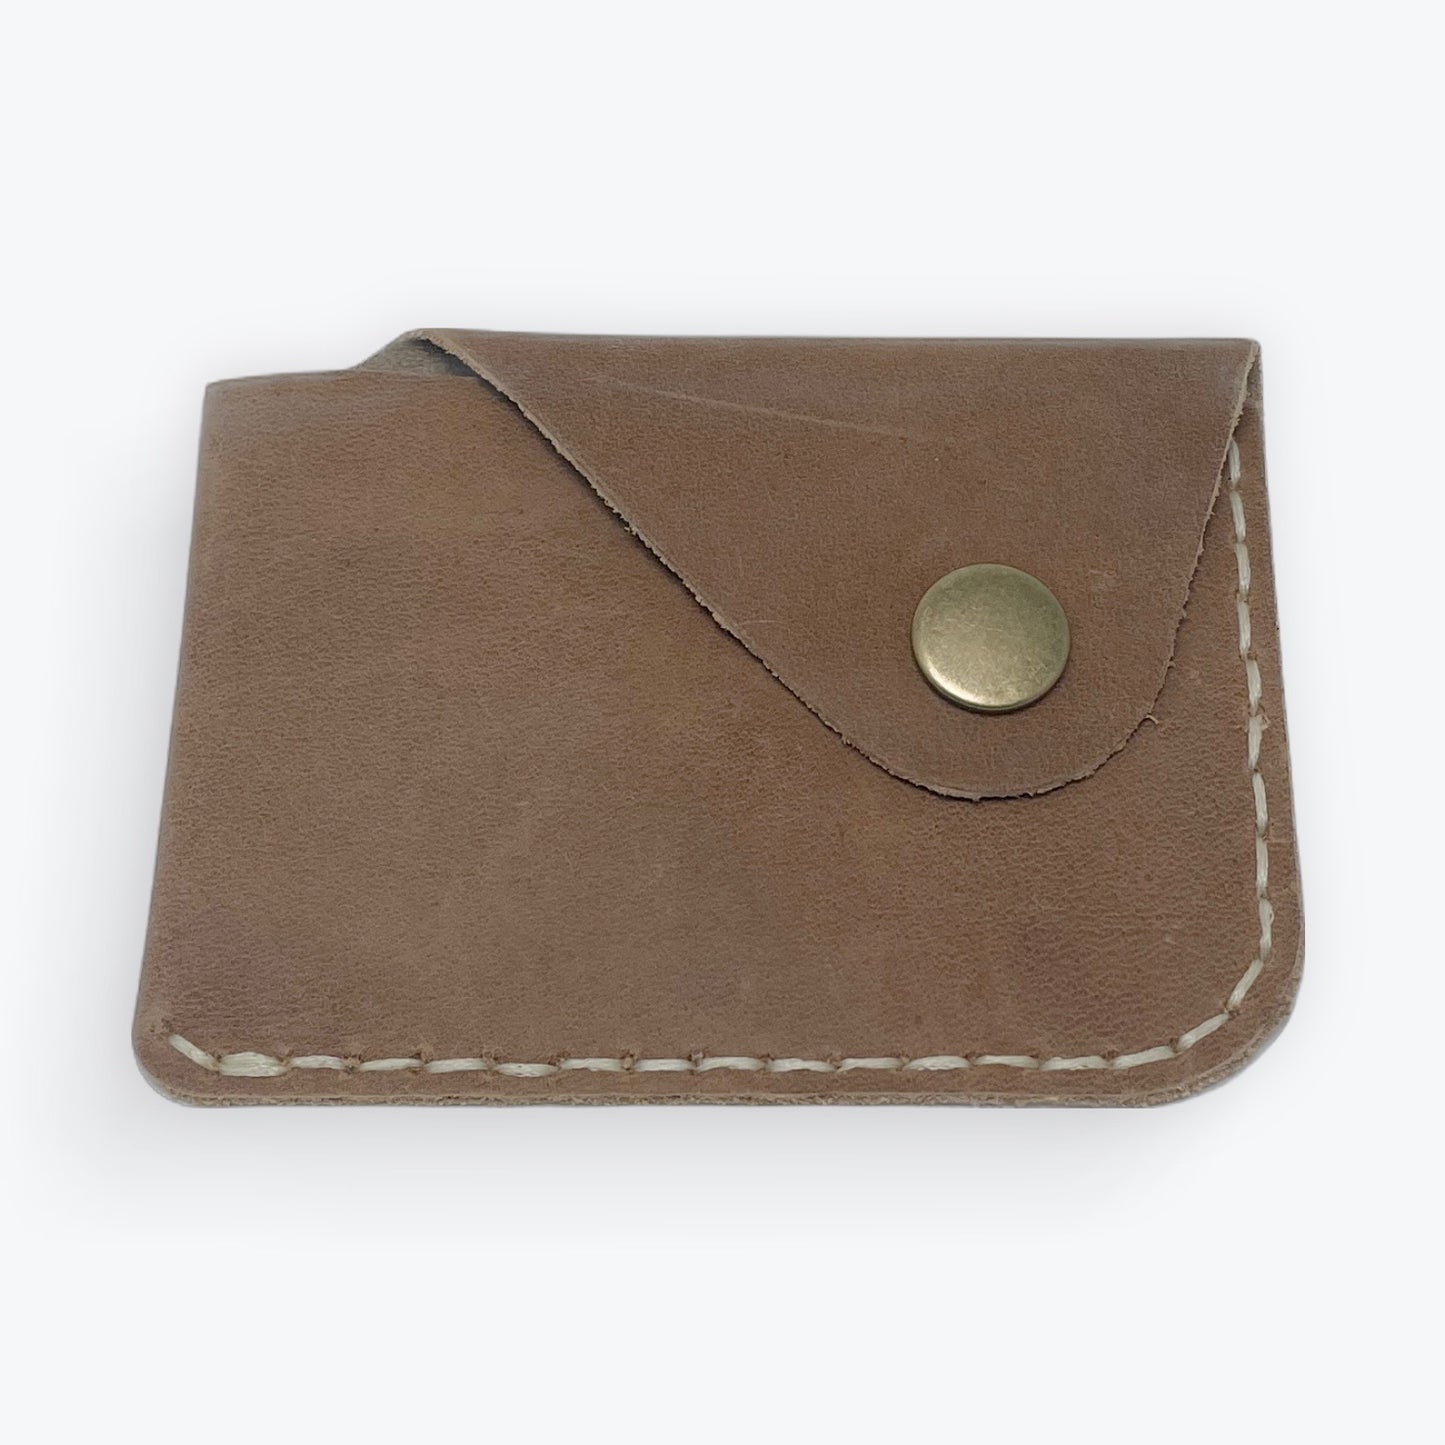 The Gun Experiment, Leather Card Holder Wallet